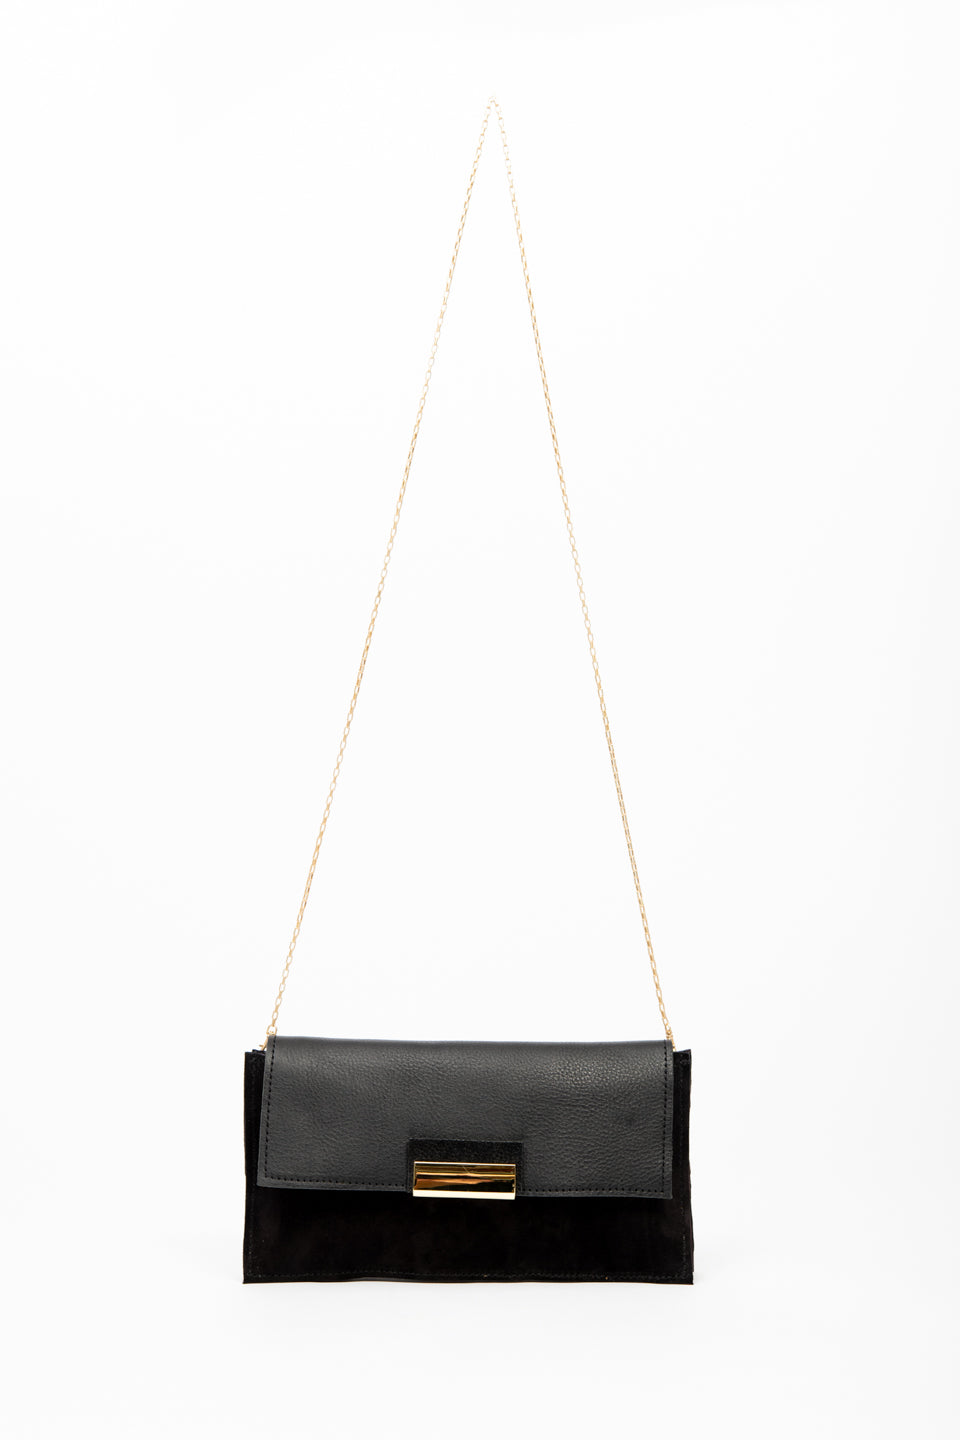 Leather evening bag RETTANGOLO model from the Variable Geometry collection by VEINAGE, handmade in Montreal Canada